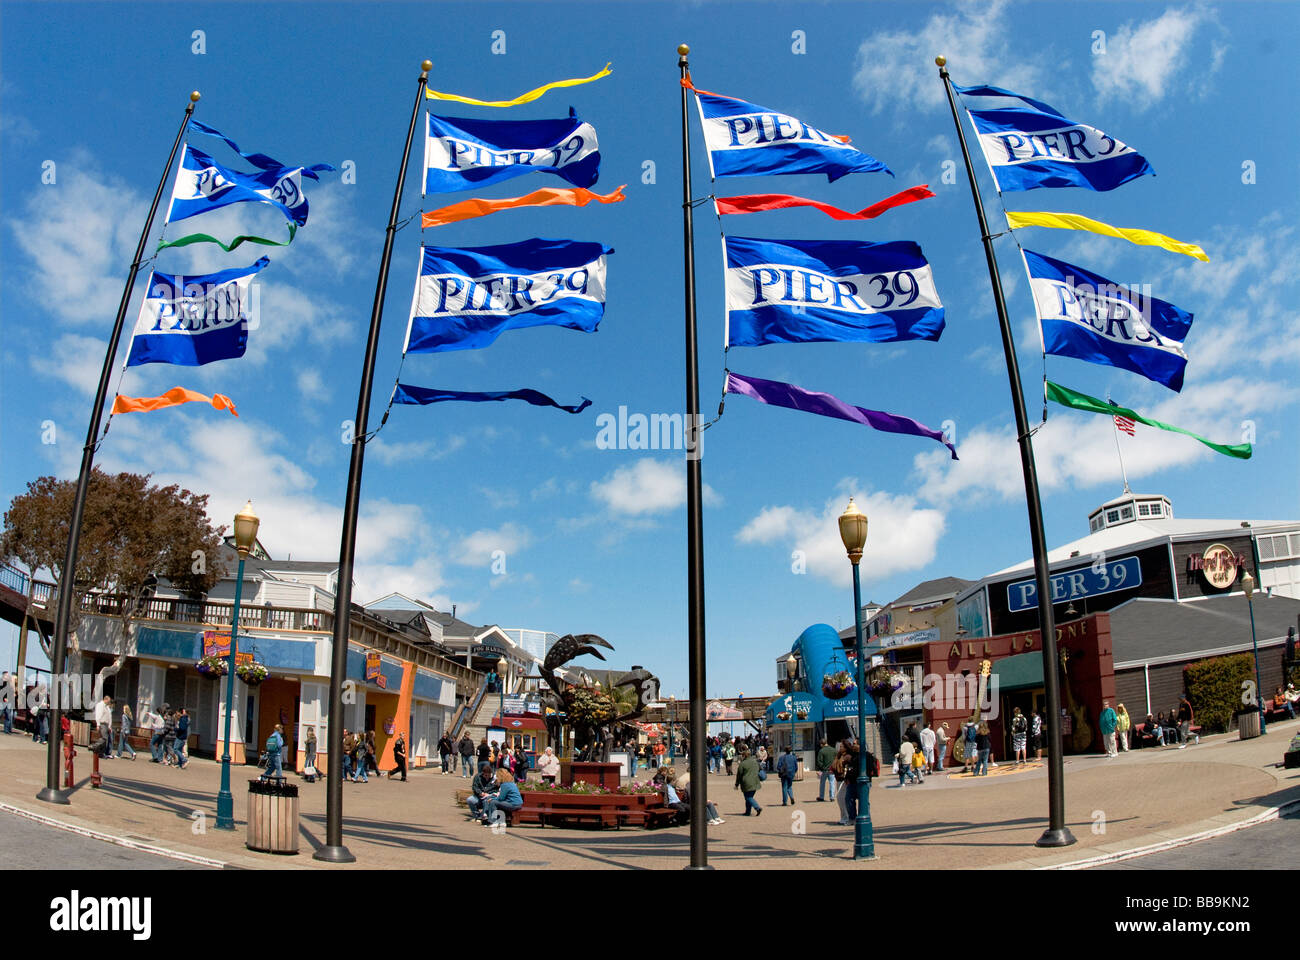 Flags waving at Pier 39 is a major tourist attraction in San Francisco California USA Stock Photo